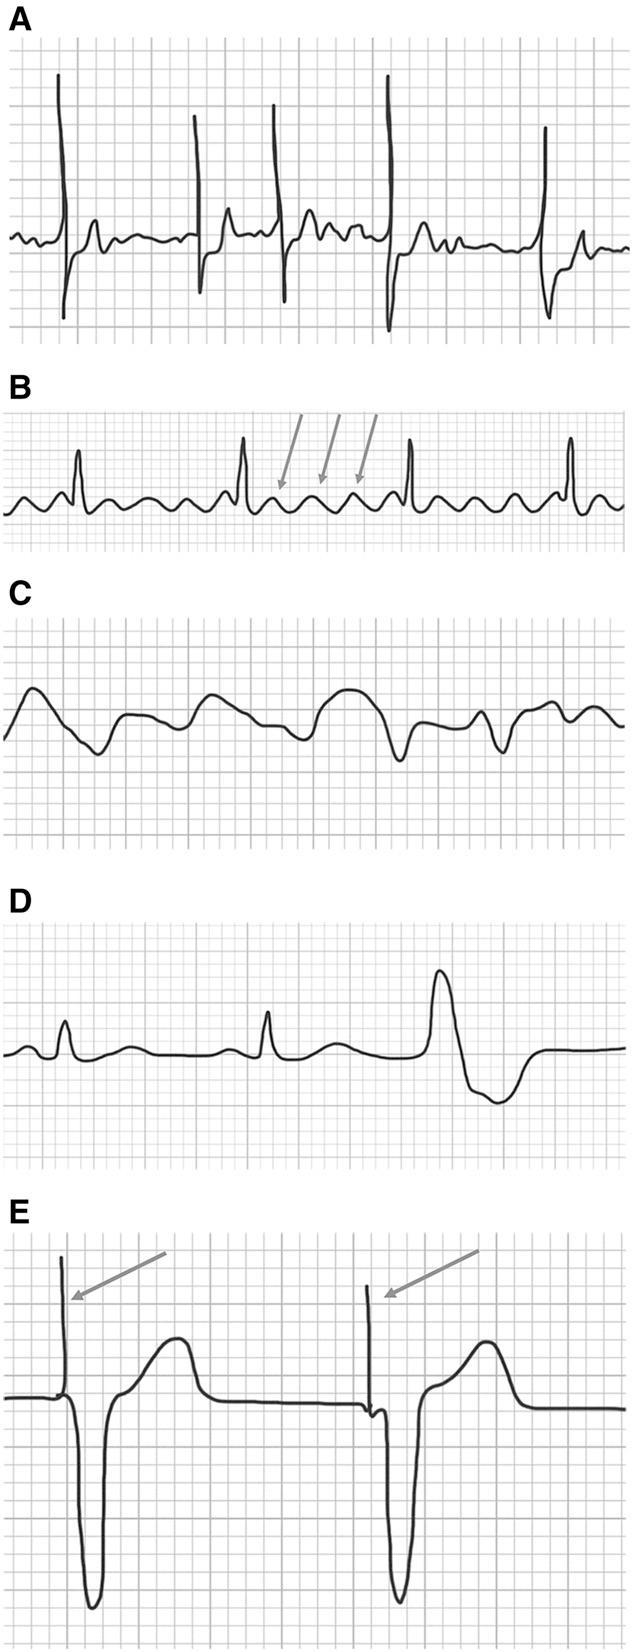 FIGURE 3. (A) Rhythm strip demonstrating first-degree atrioventricular block with PR interval of.200 ms.